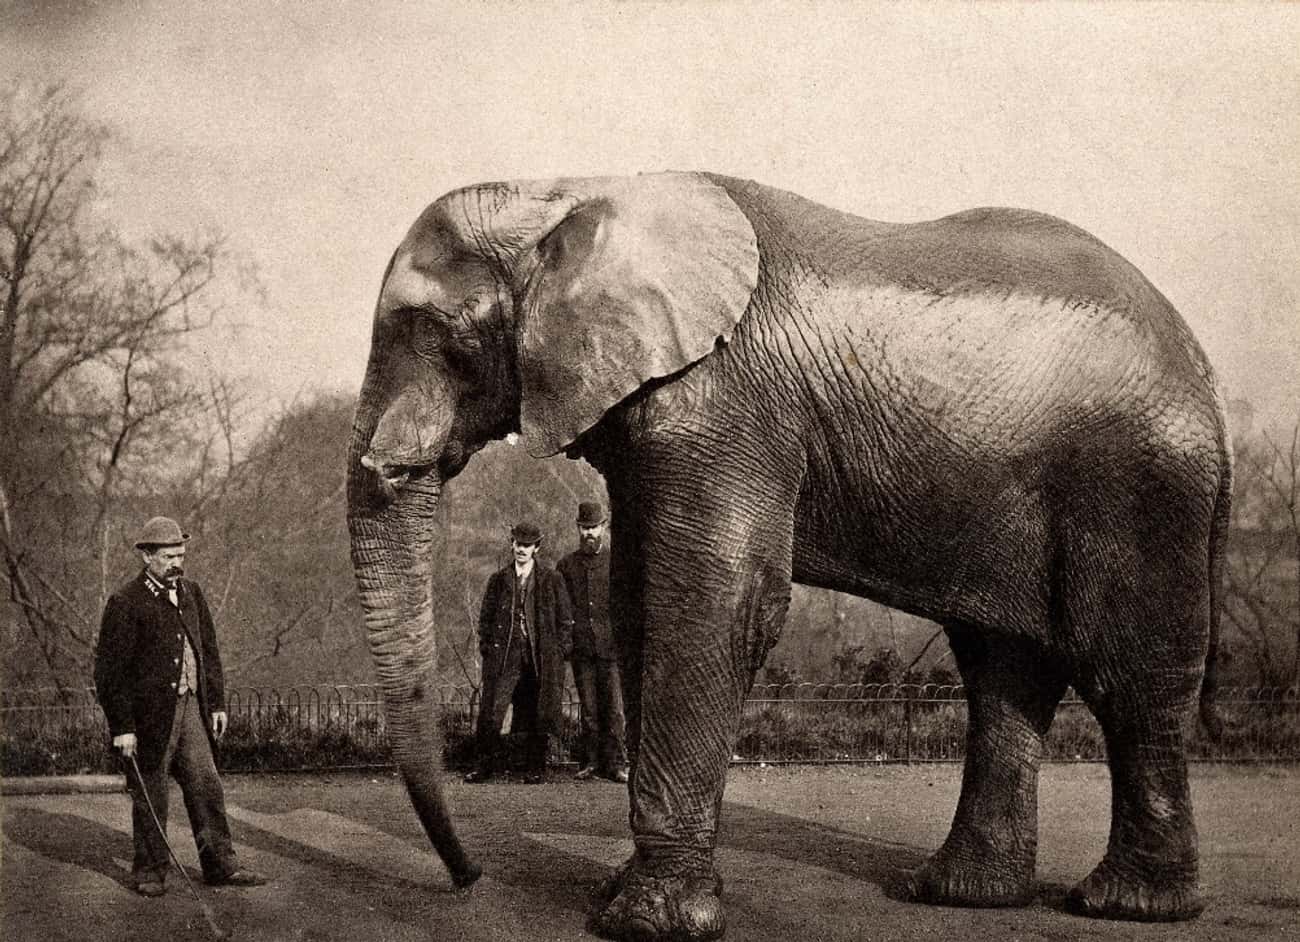 He Marched 21 Elephants And 17 Camels Across The Brooklyn Bridge